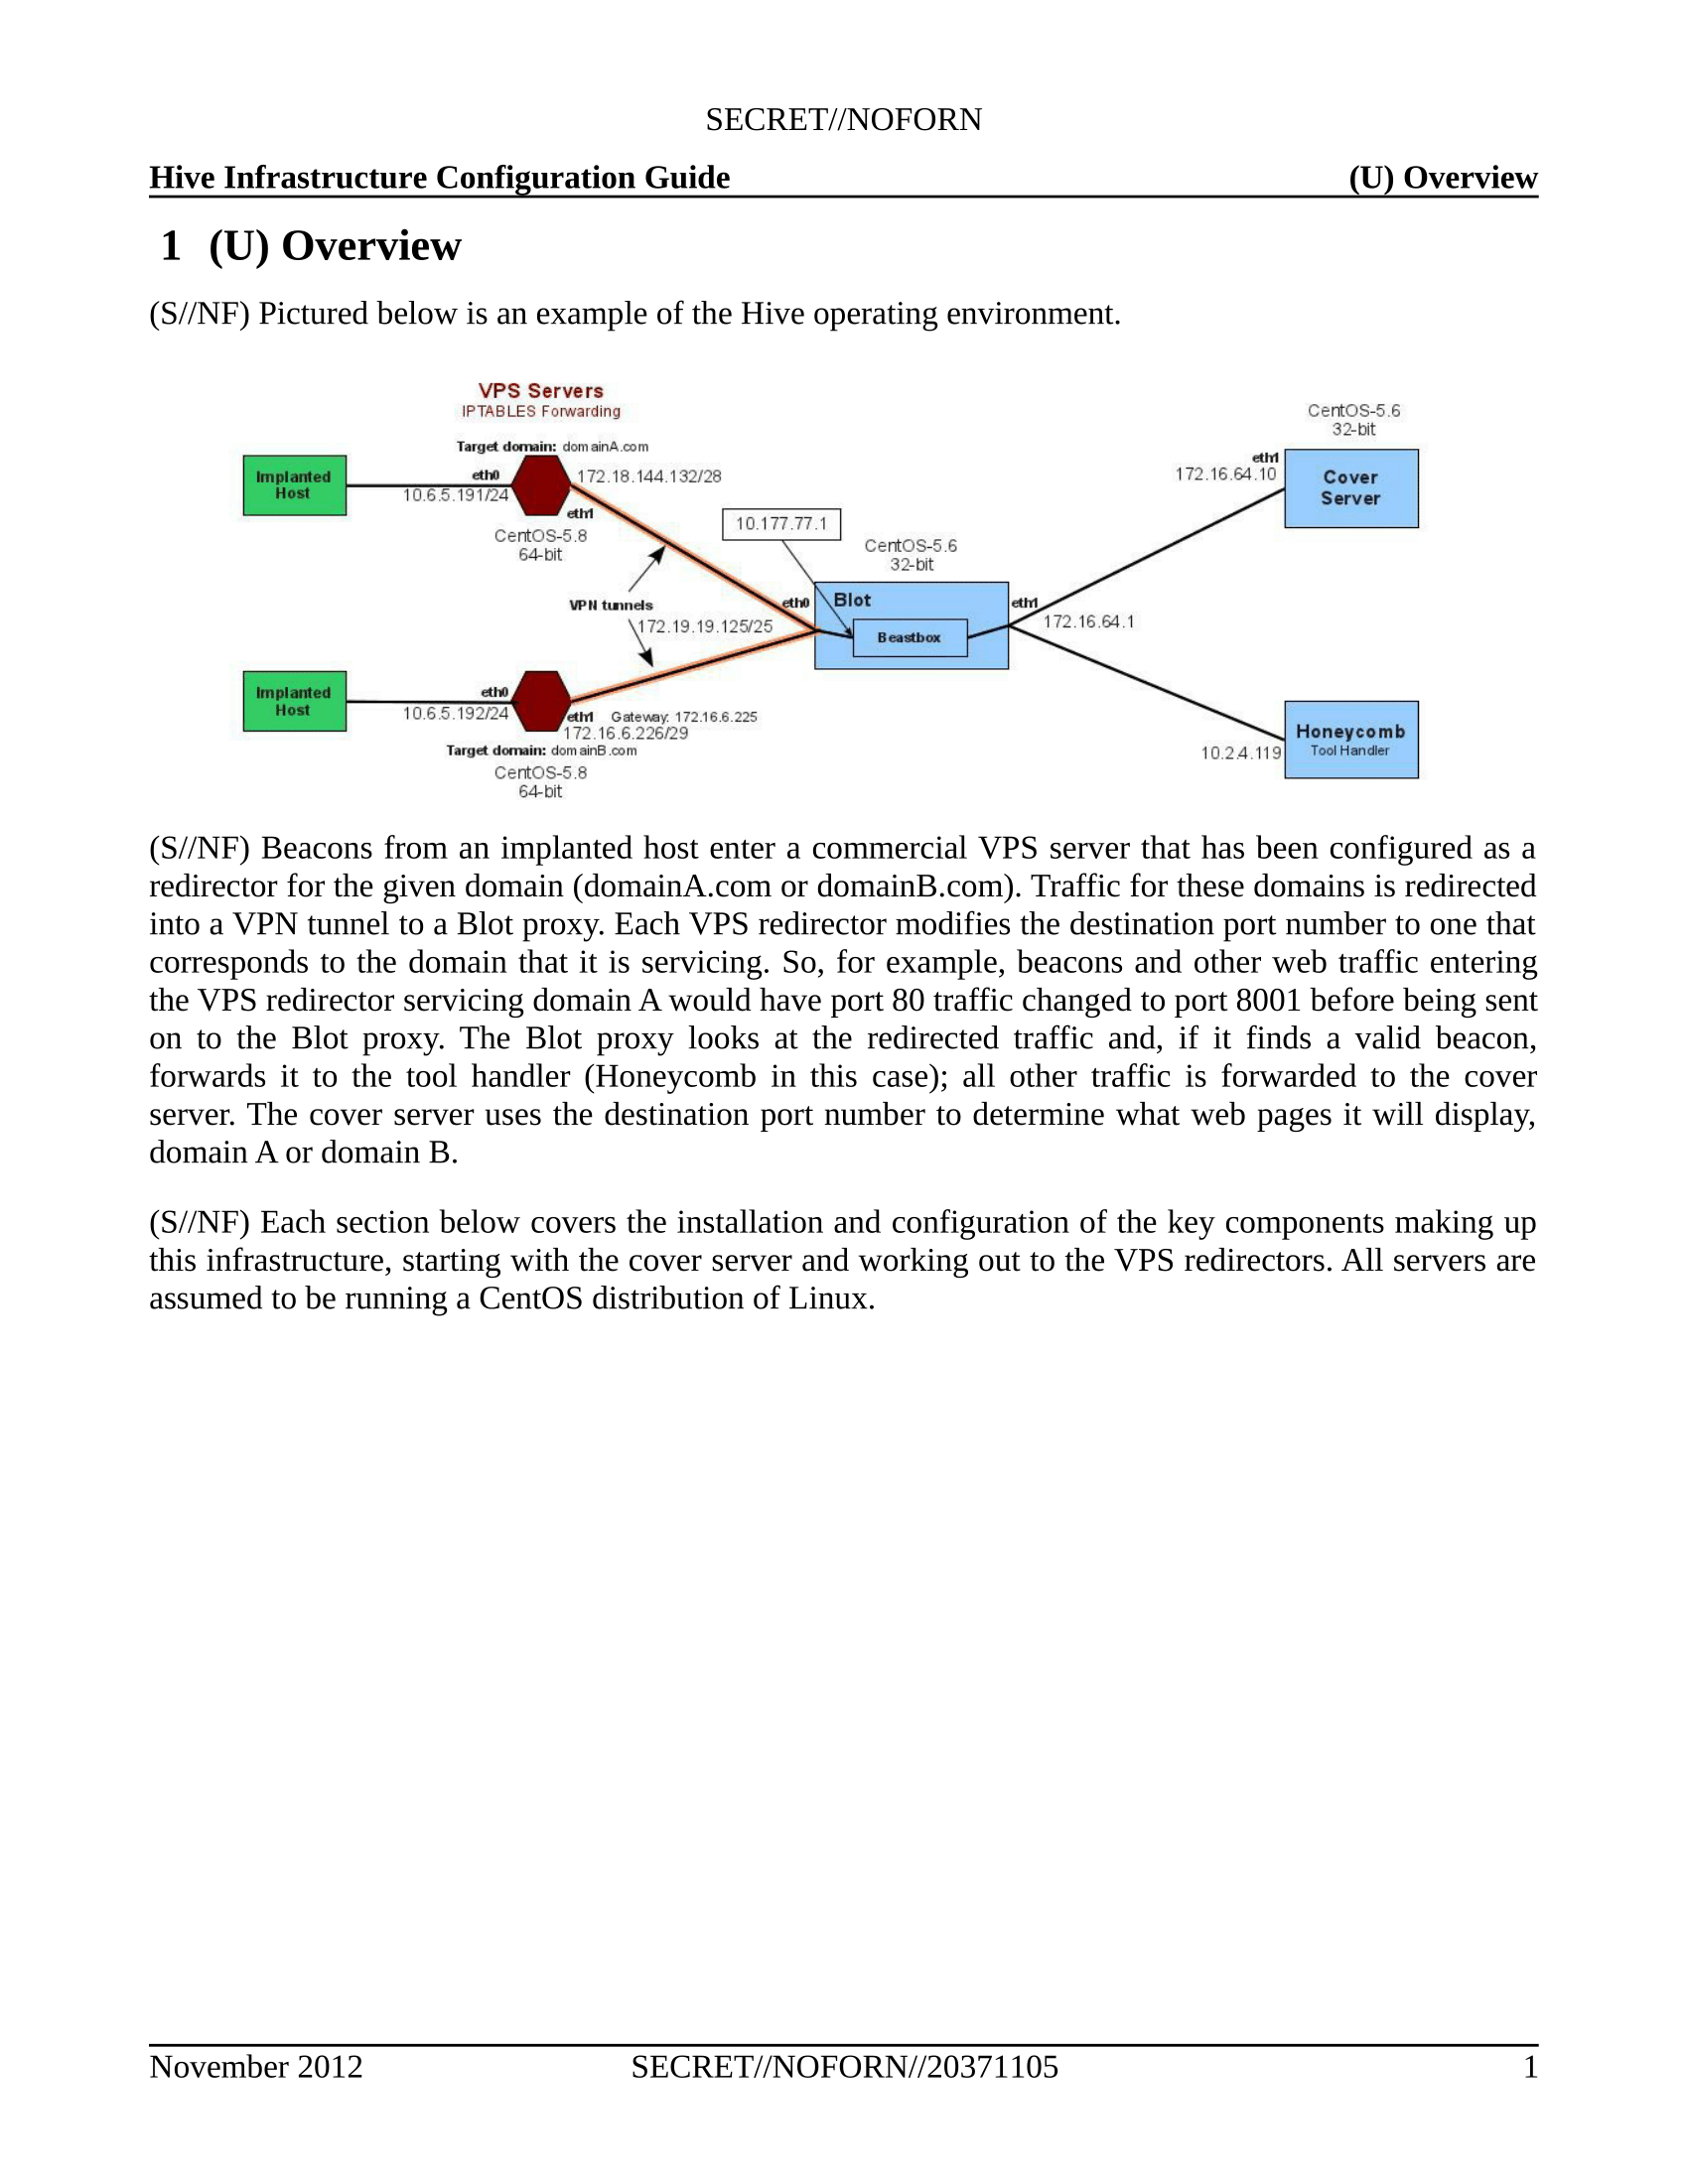 hive-Infrastructure-Configuration_Guide-07.png